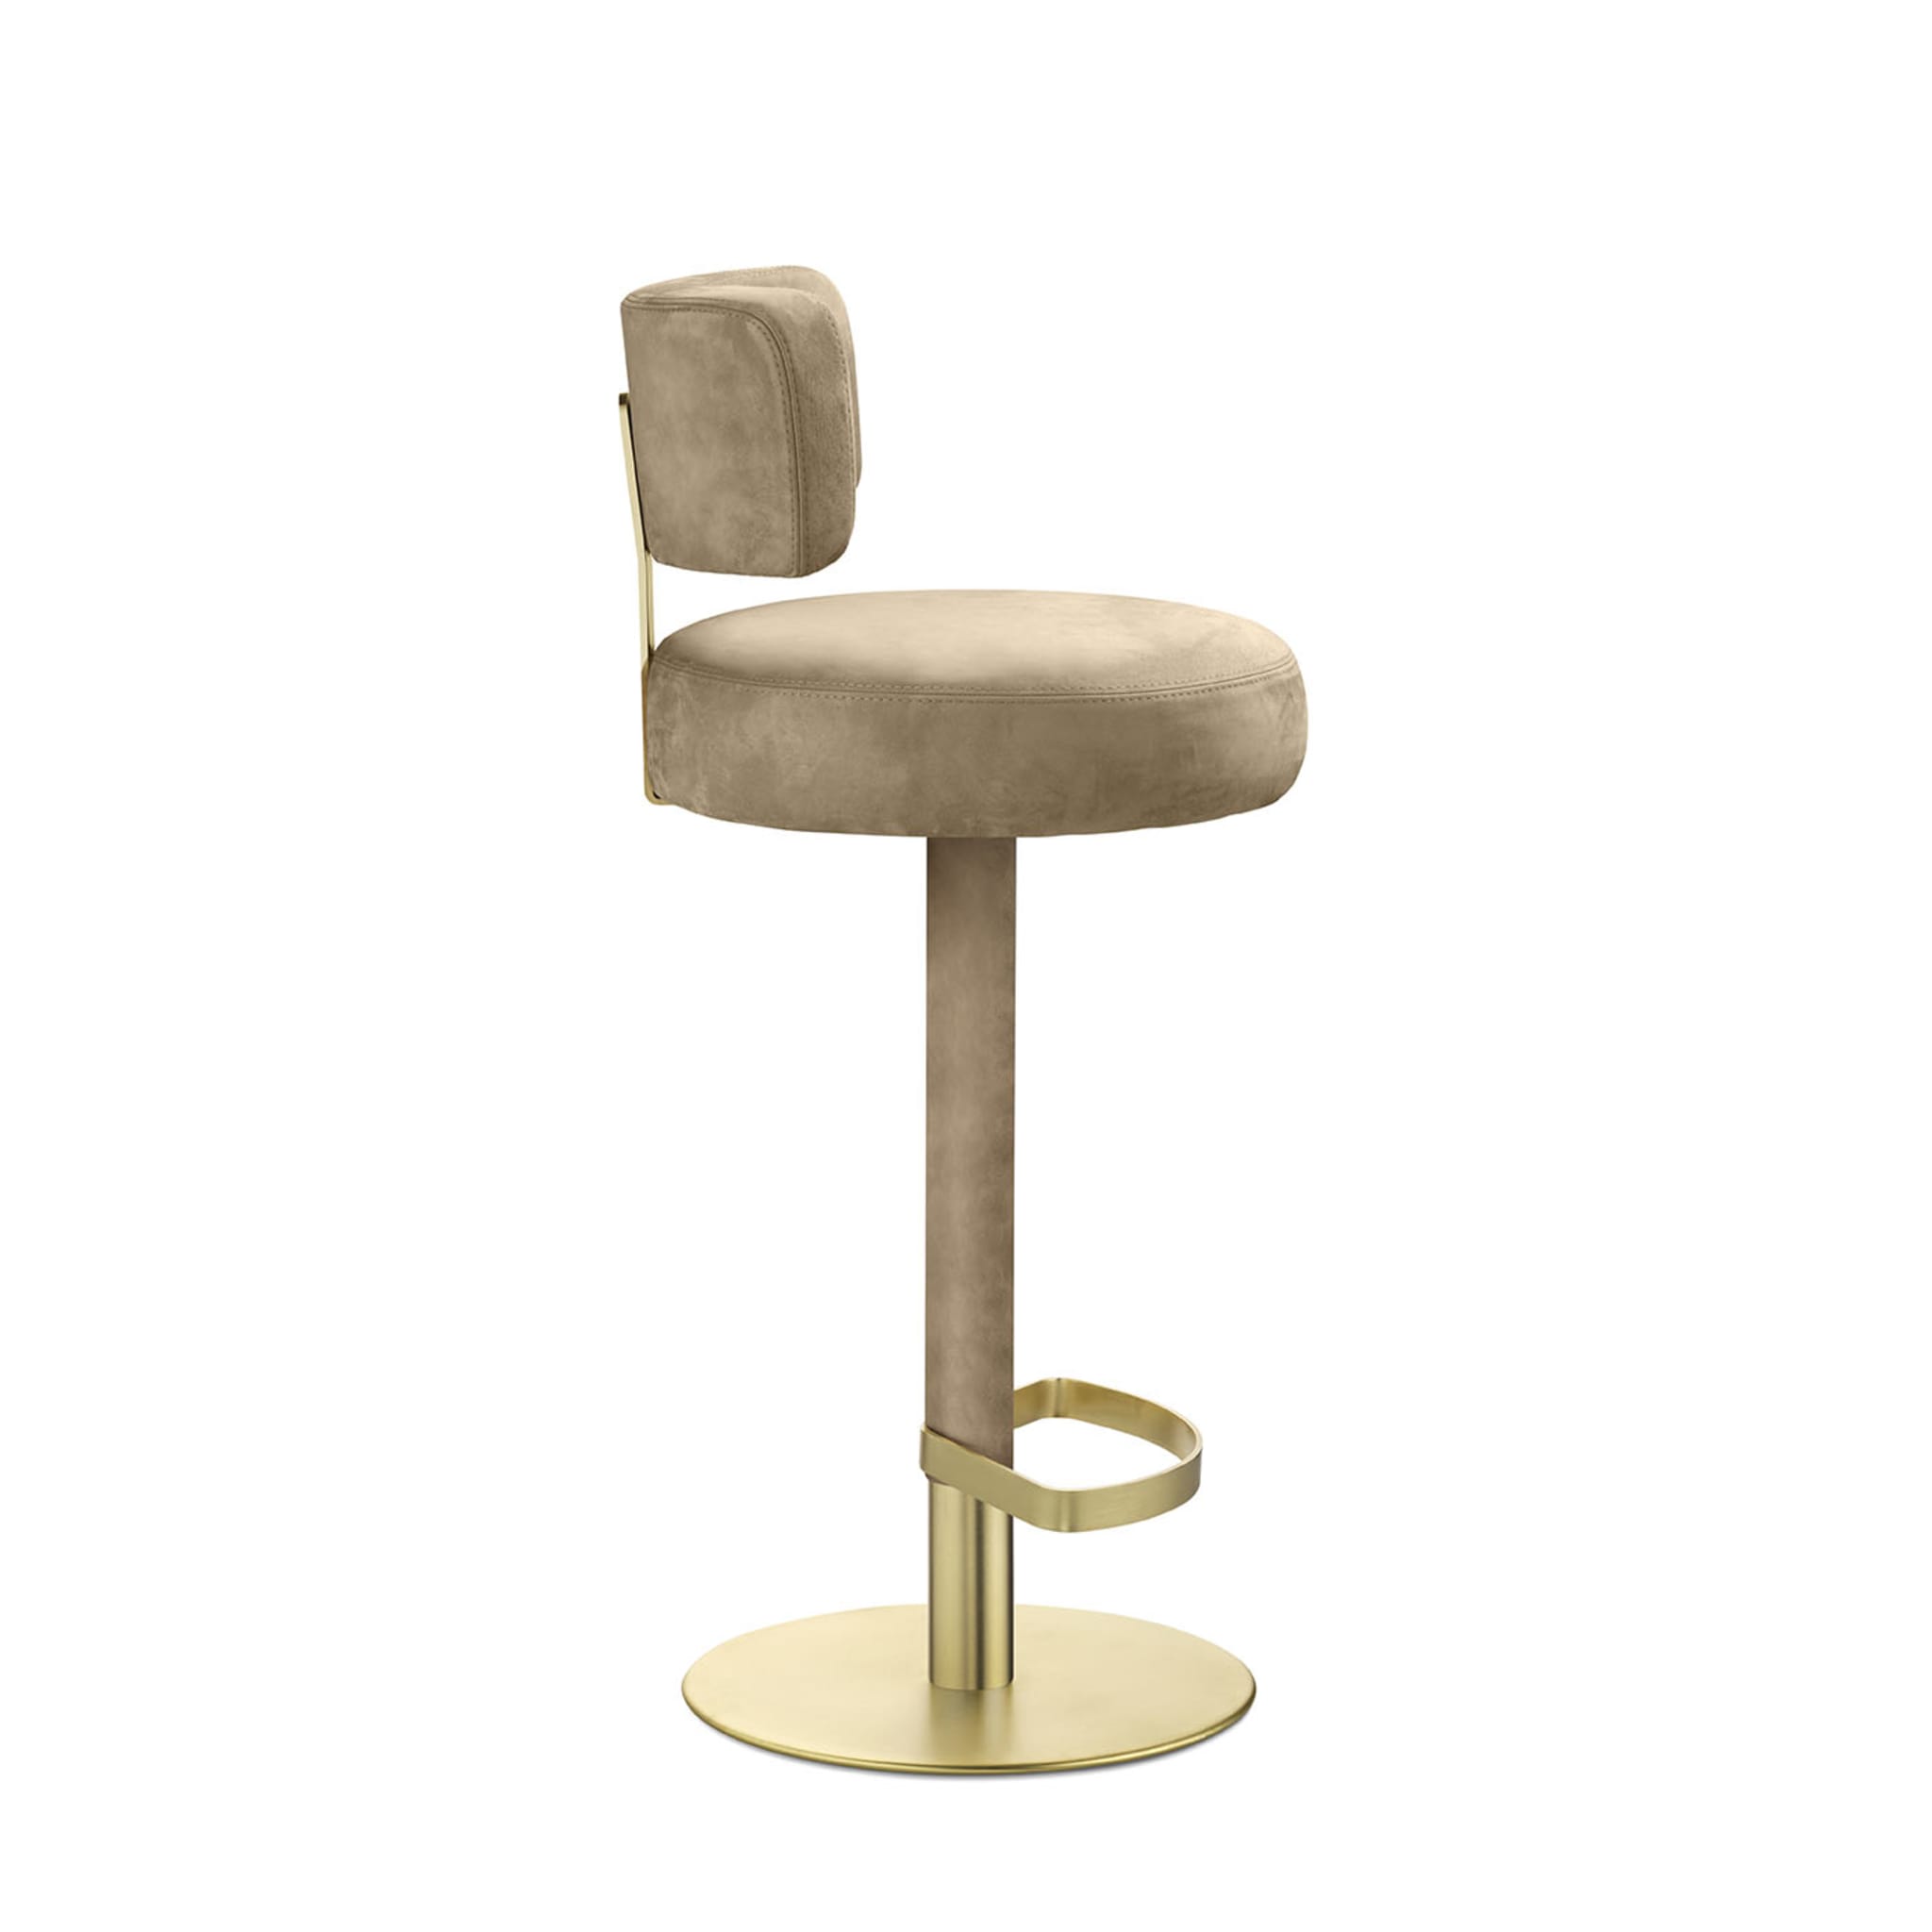 Alfred fixed Gold Bar Stool - Alternative view 4